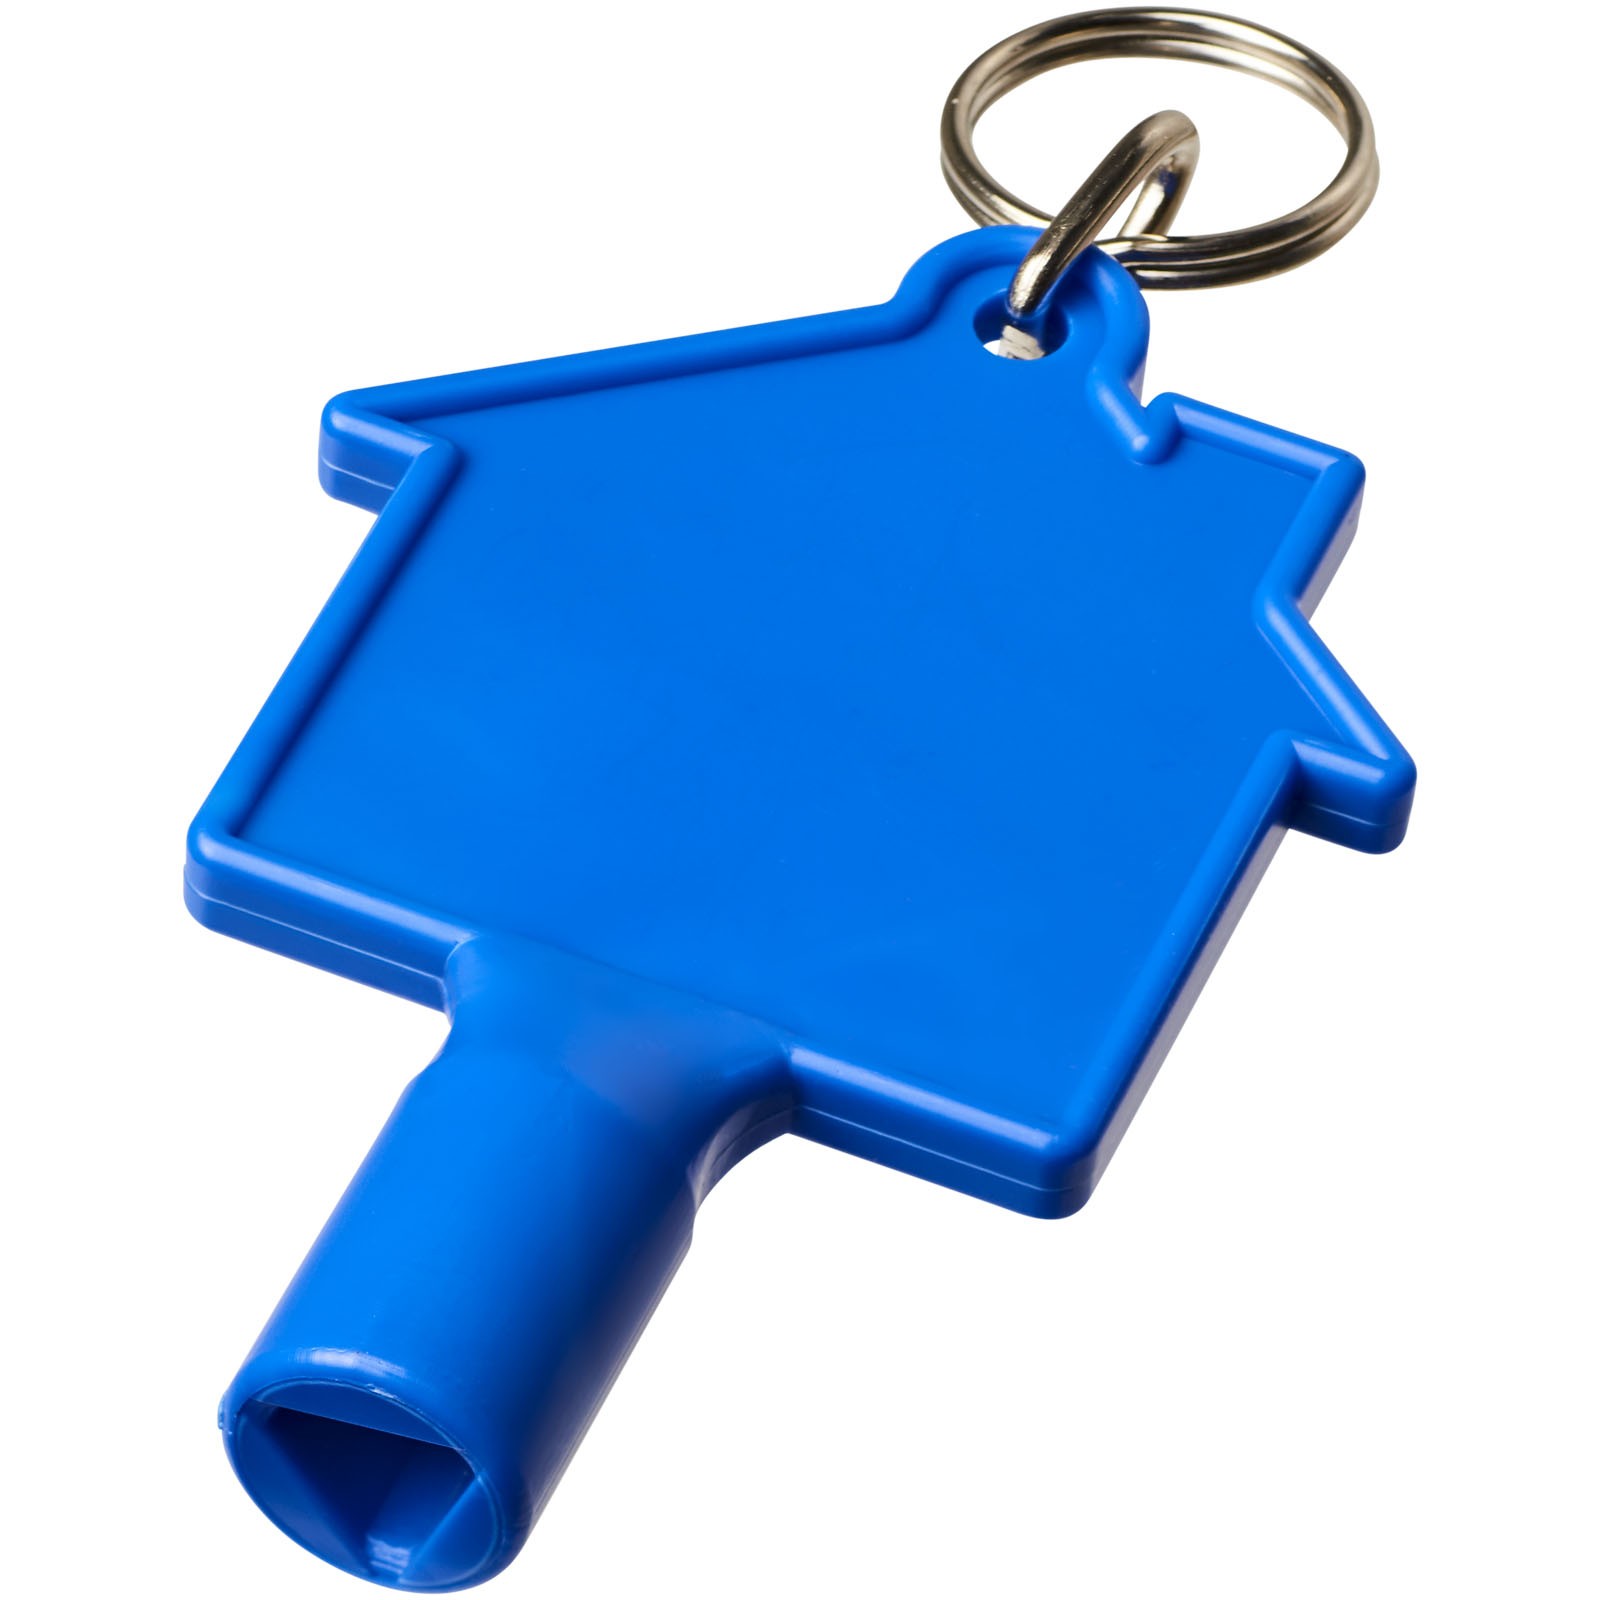 Maximilian house-shaped meterbox key with keychain - Blue